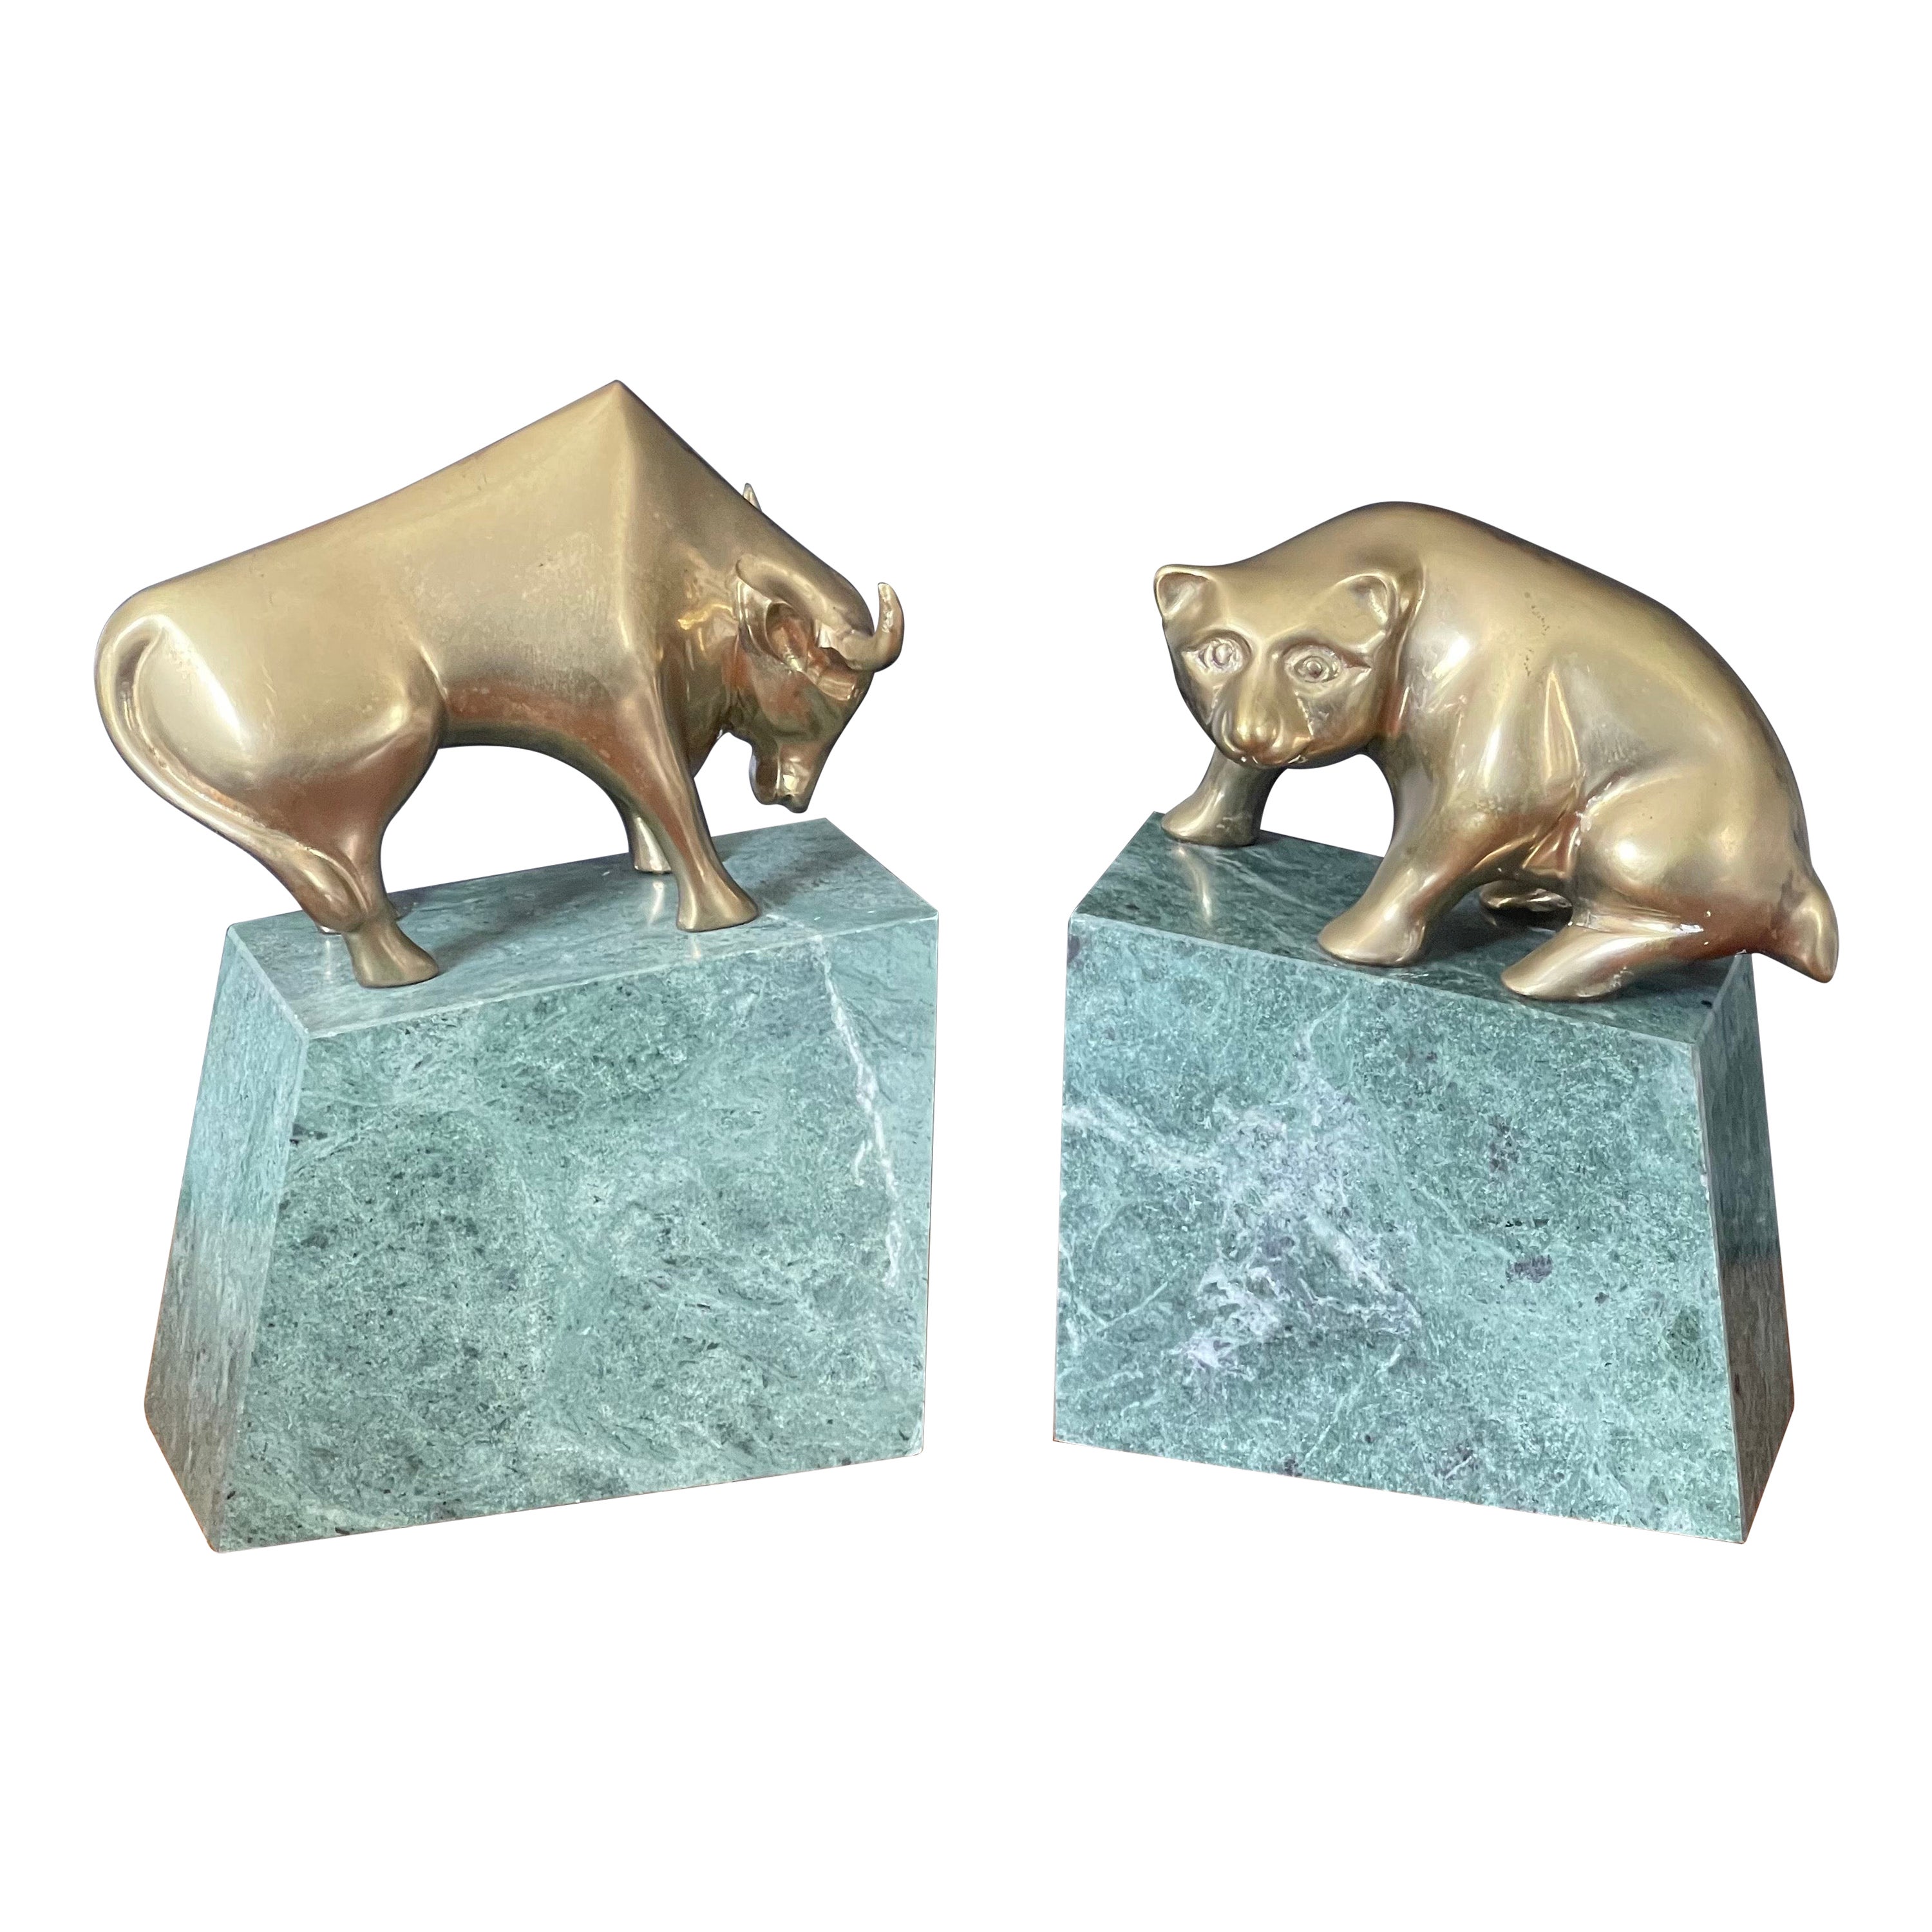 BRASS & MARBLE BOOKENDS BOOKENDS "WALL STREET"  BULL AND BEAR BOOKENDS 